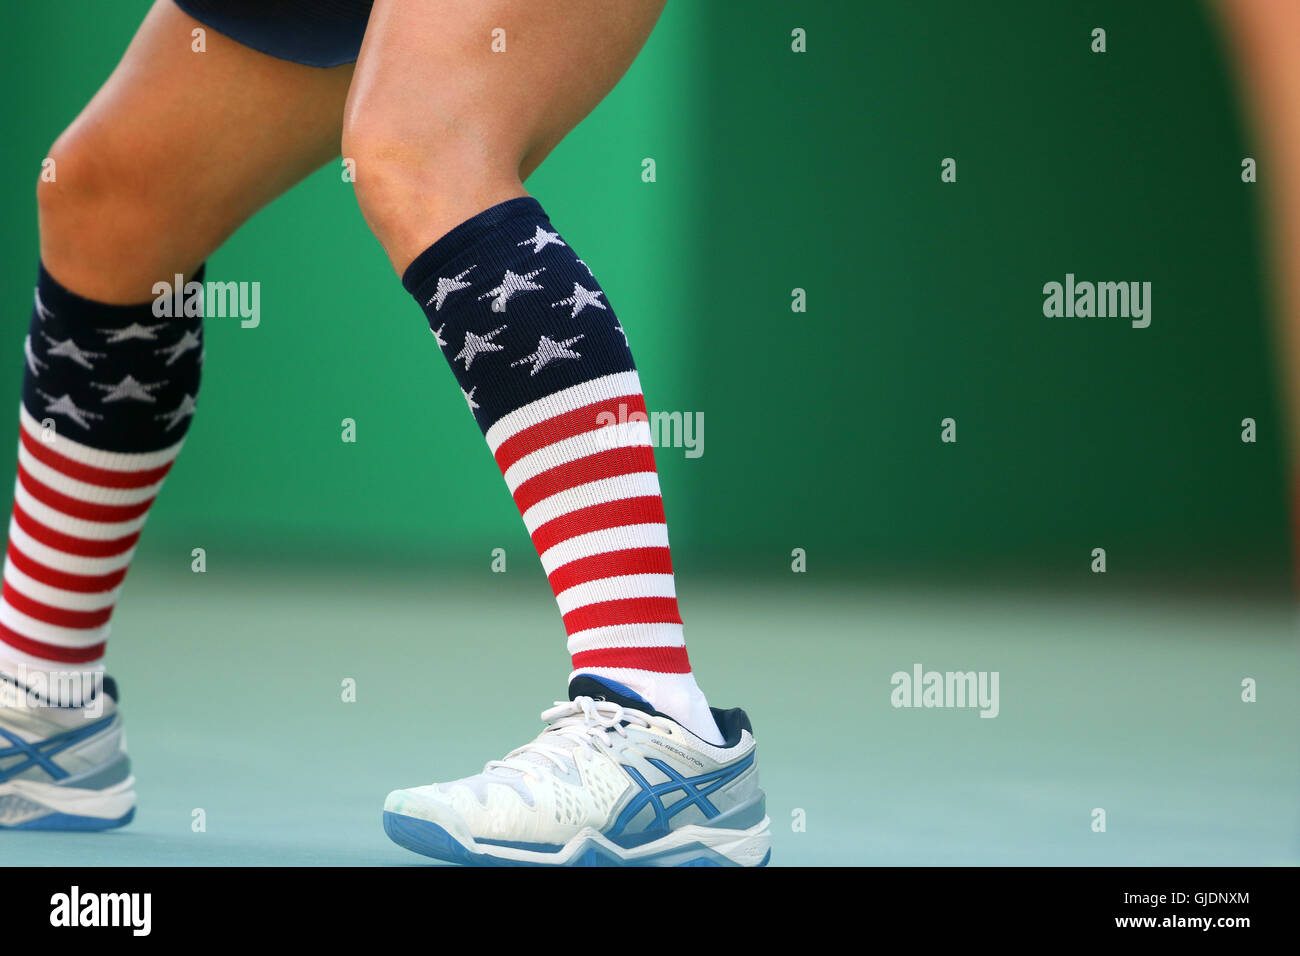 Rio de Janeiro, Brazil. 14th Aug, 2016. Stars and Stripes socks of Bethanie Mattek-Sands, the Olympic Gold Medal Winner in the Tennis Mixed Doubles at Rio de Janeiro. Her partner was Jack Sock. Stock Photo